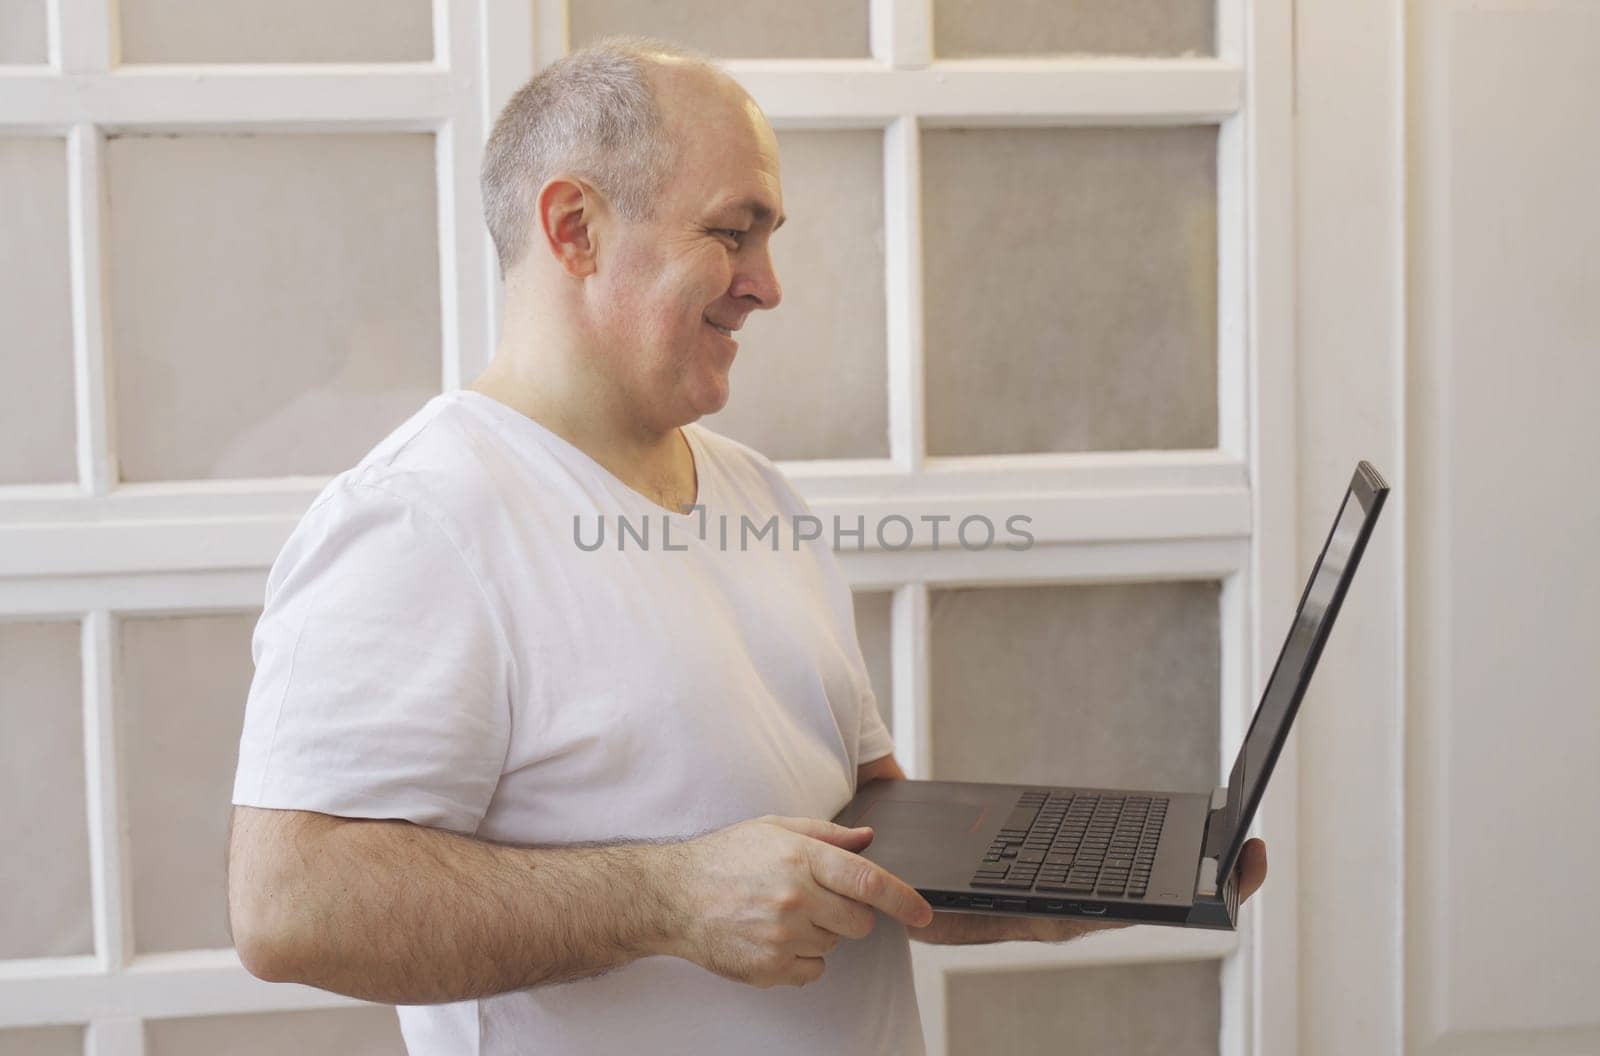 A man holds a laptop in his hands, stands at home and has a lively conversation on a video call.